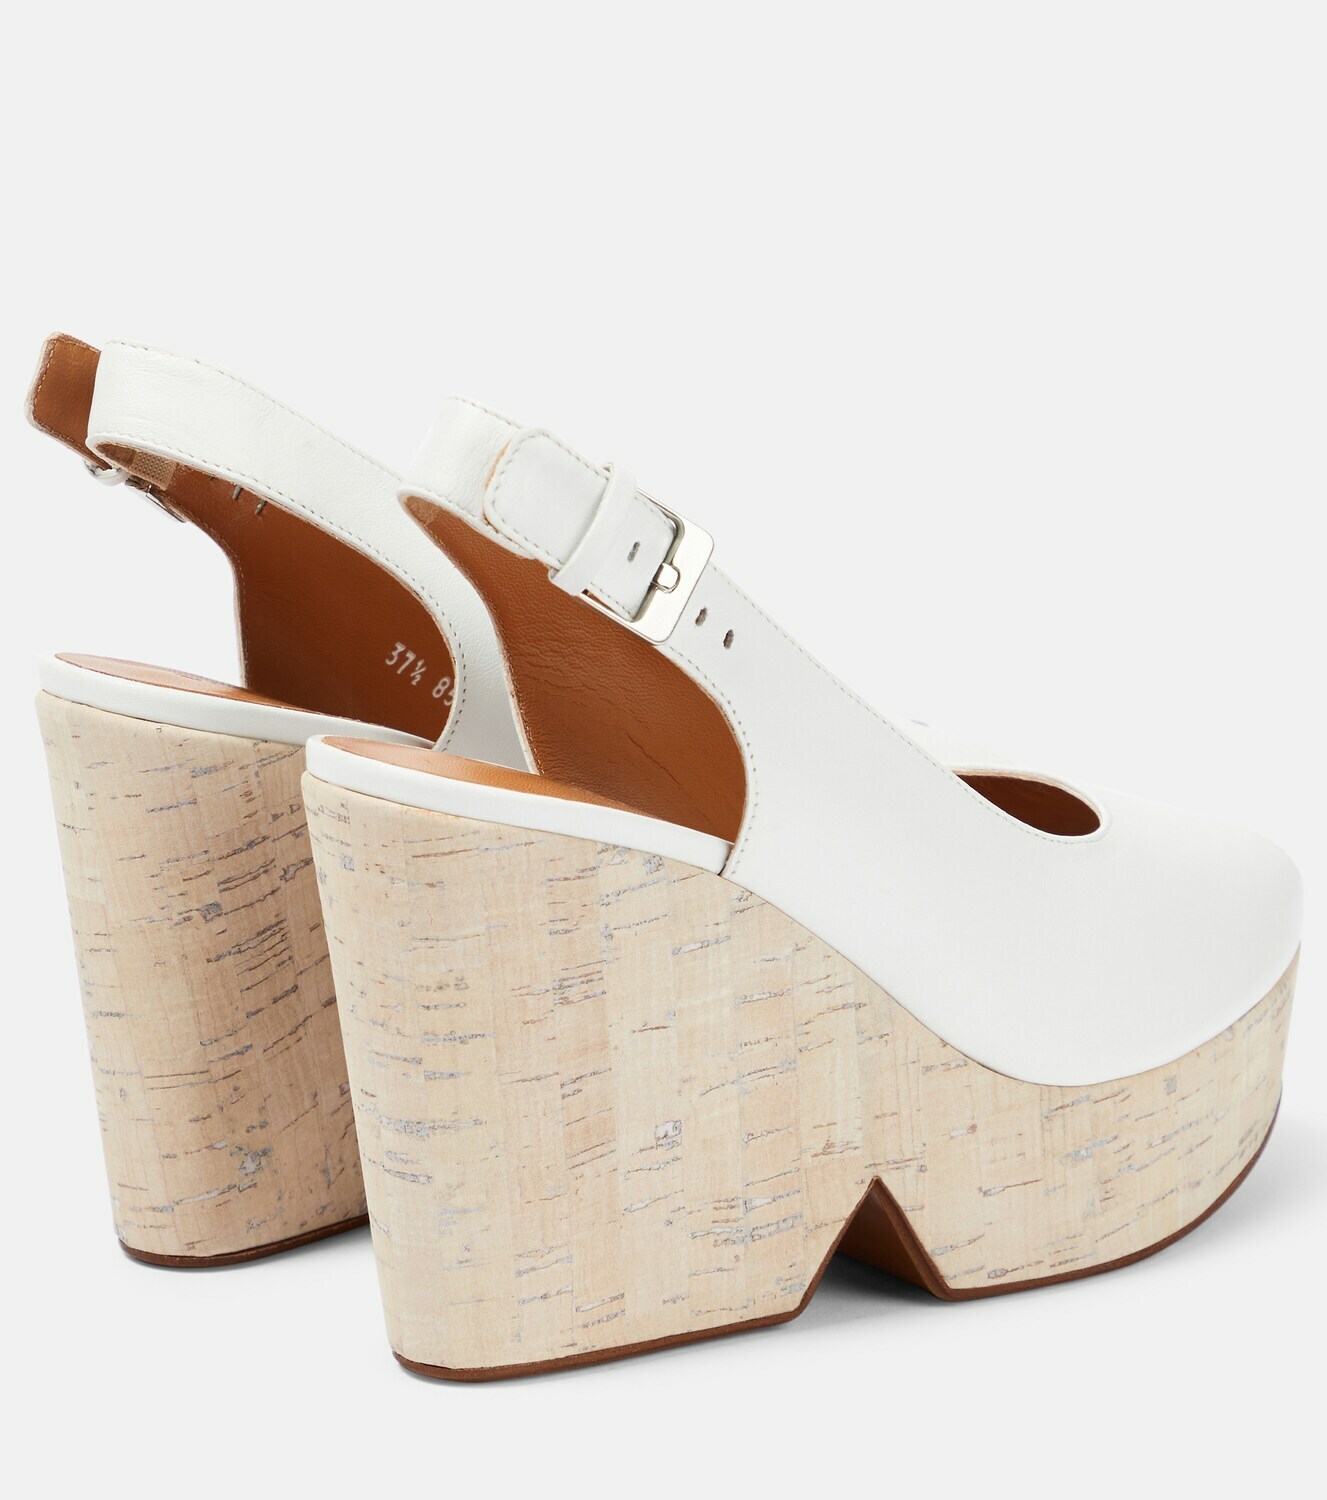 Clergerie - Dylan slingback wedge pumps Clergerie